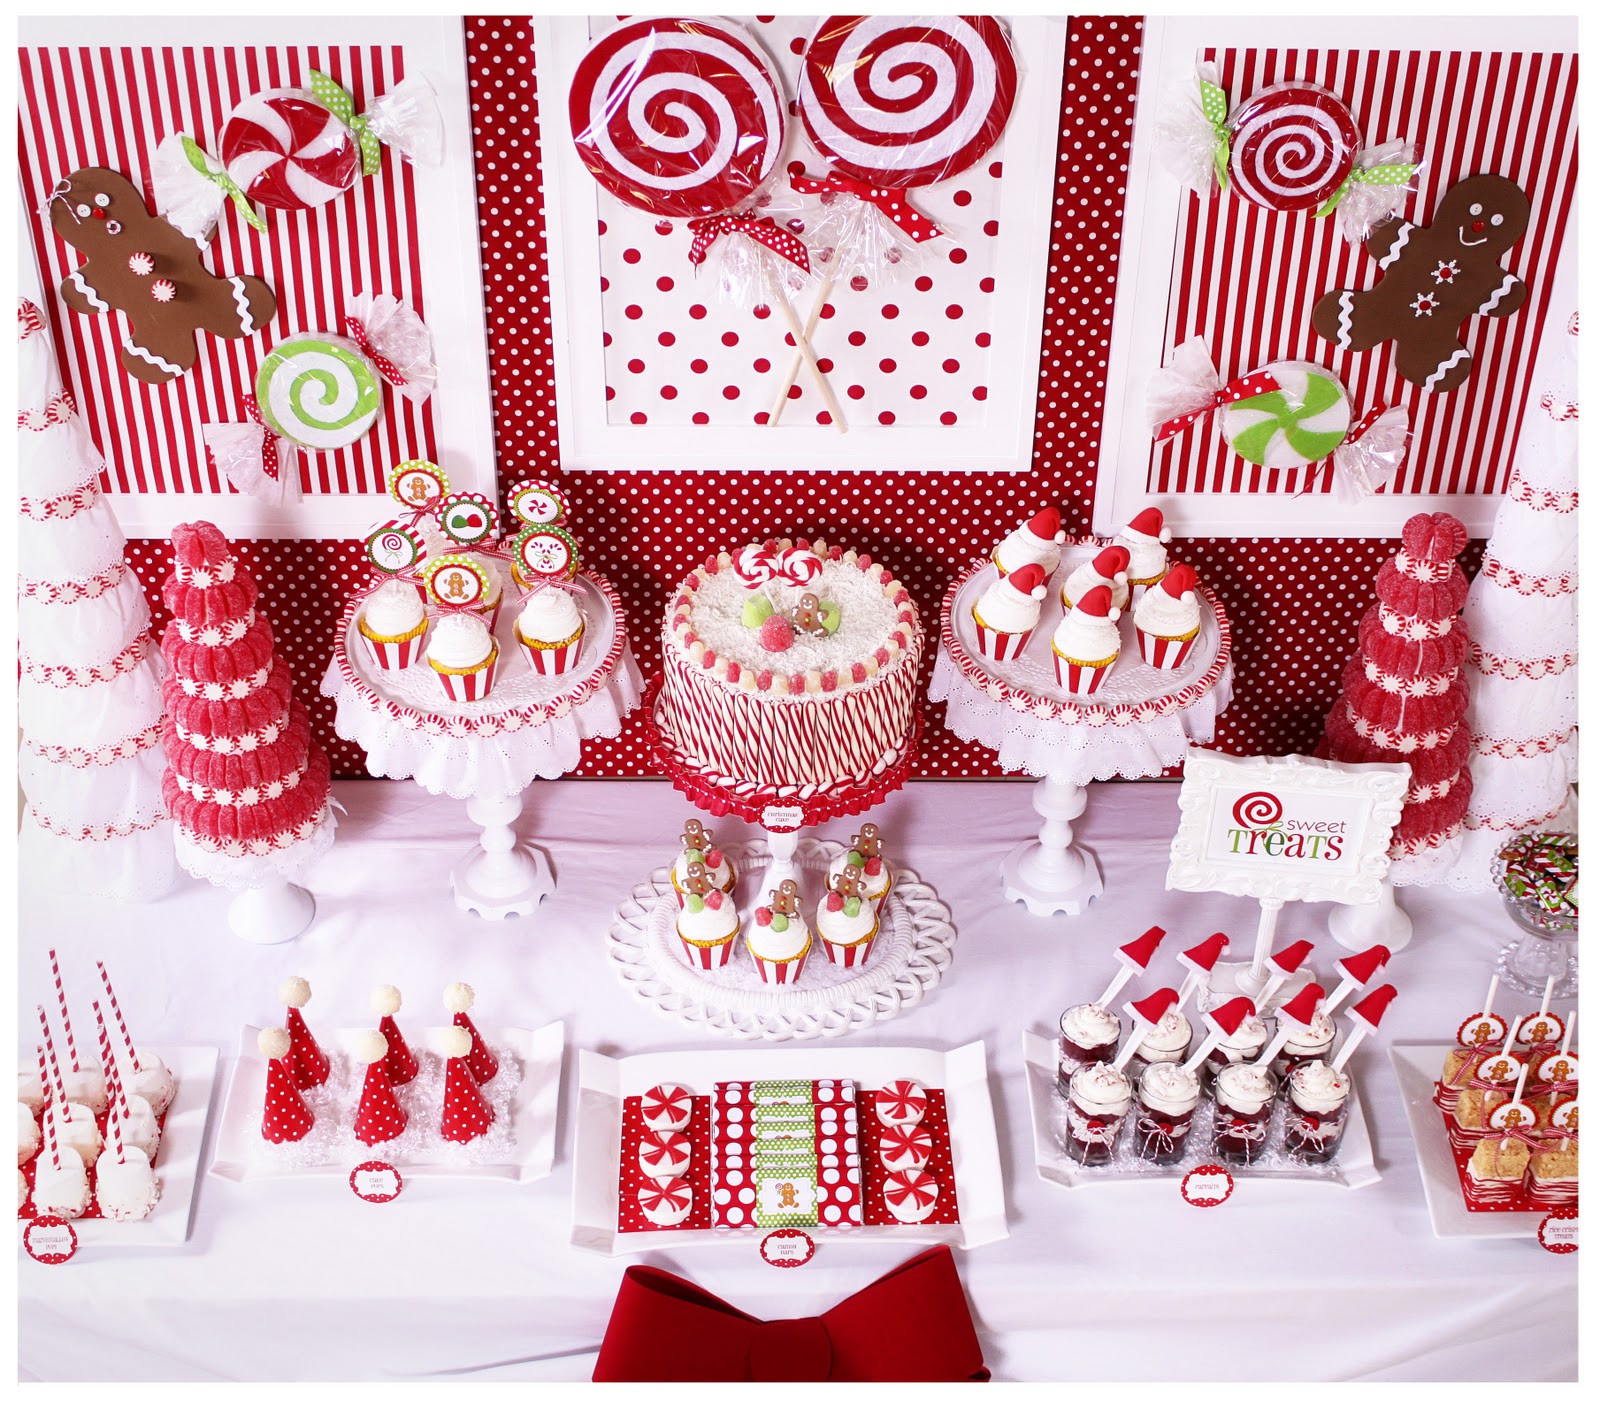 Holiday Birthday Party Ideas
 Kara s Party Ideas Candy Land Christmas Party